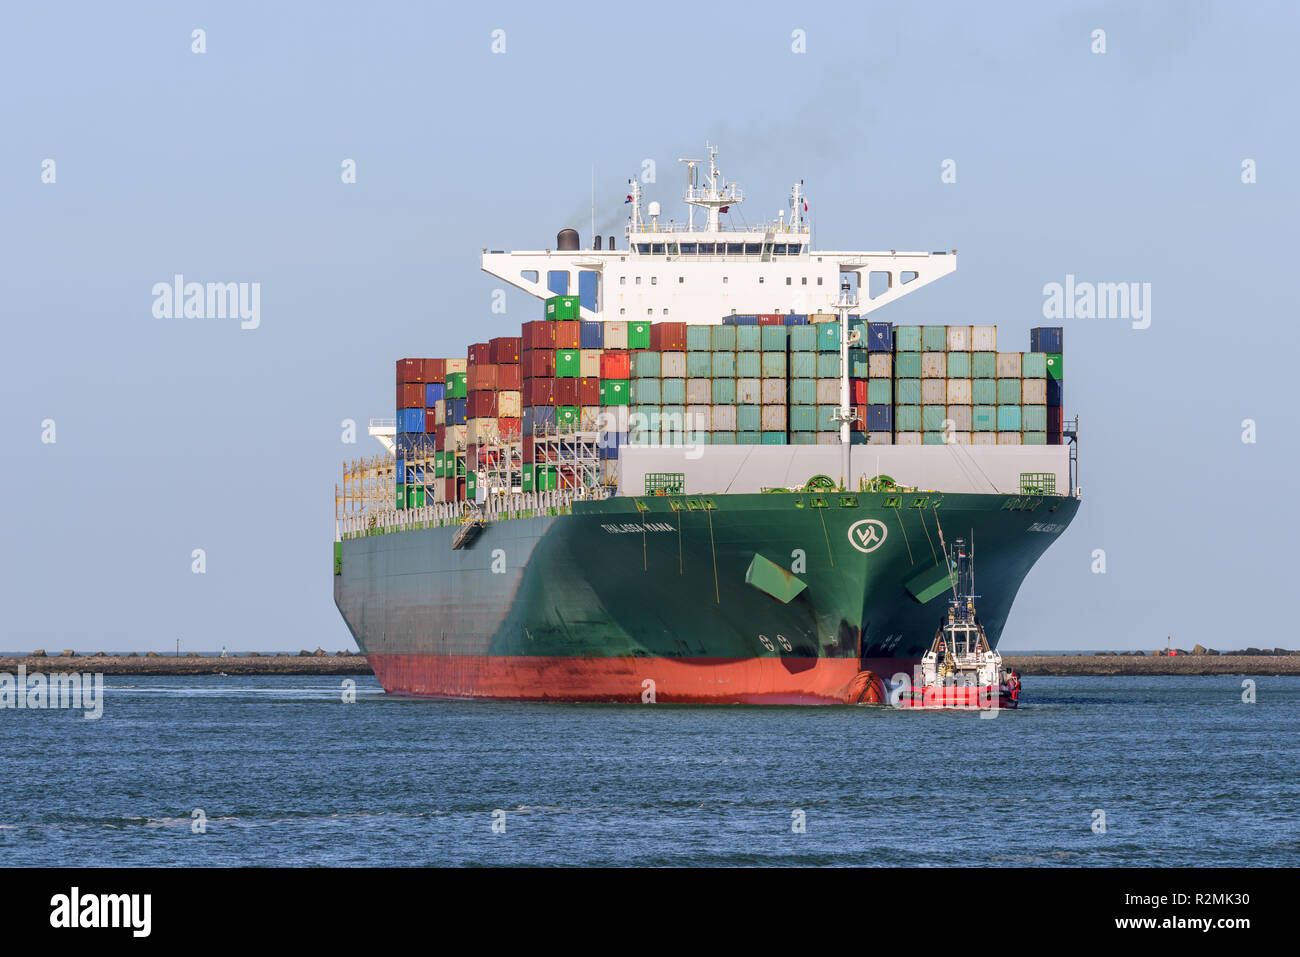 ROTTERDAM, THE NETHERLANDS - FEBRUARY 16, 2018: The large container ship Thalassa Mana is escorted by a tug, as it arrives at the Maasvlakte, Port of  Stock Photo